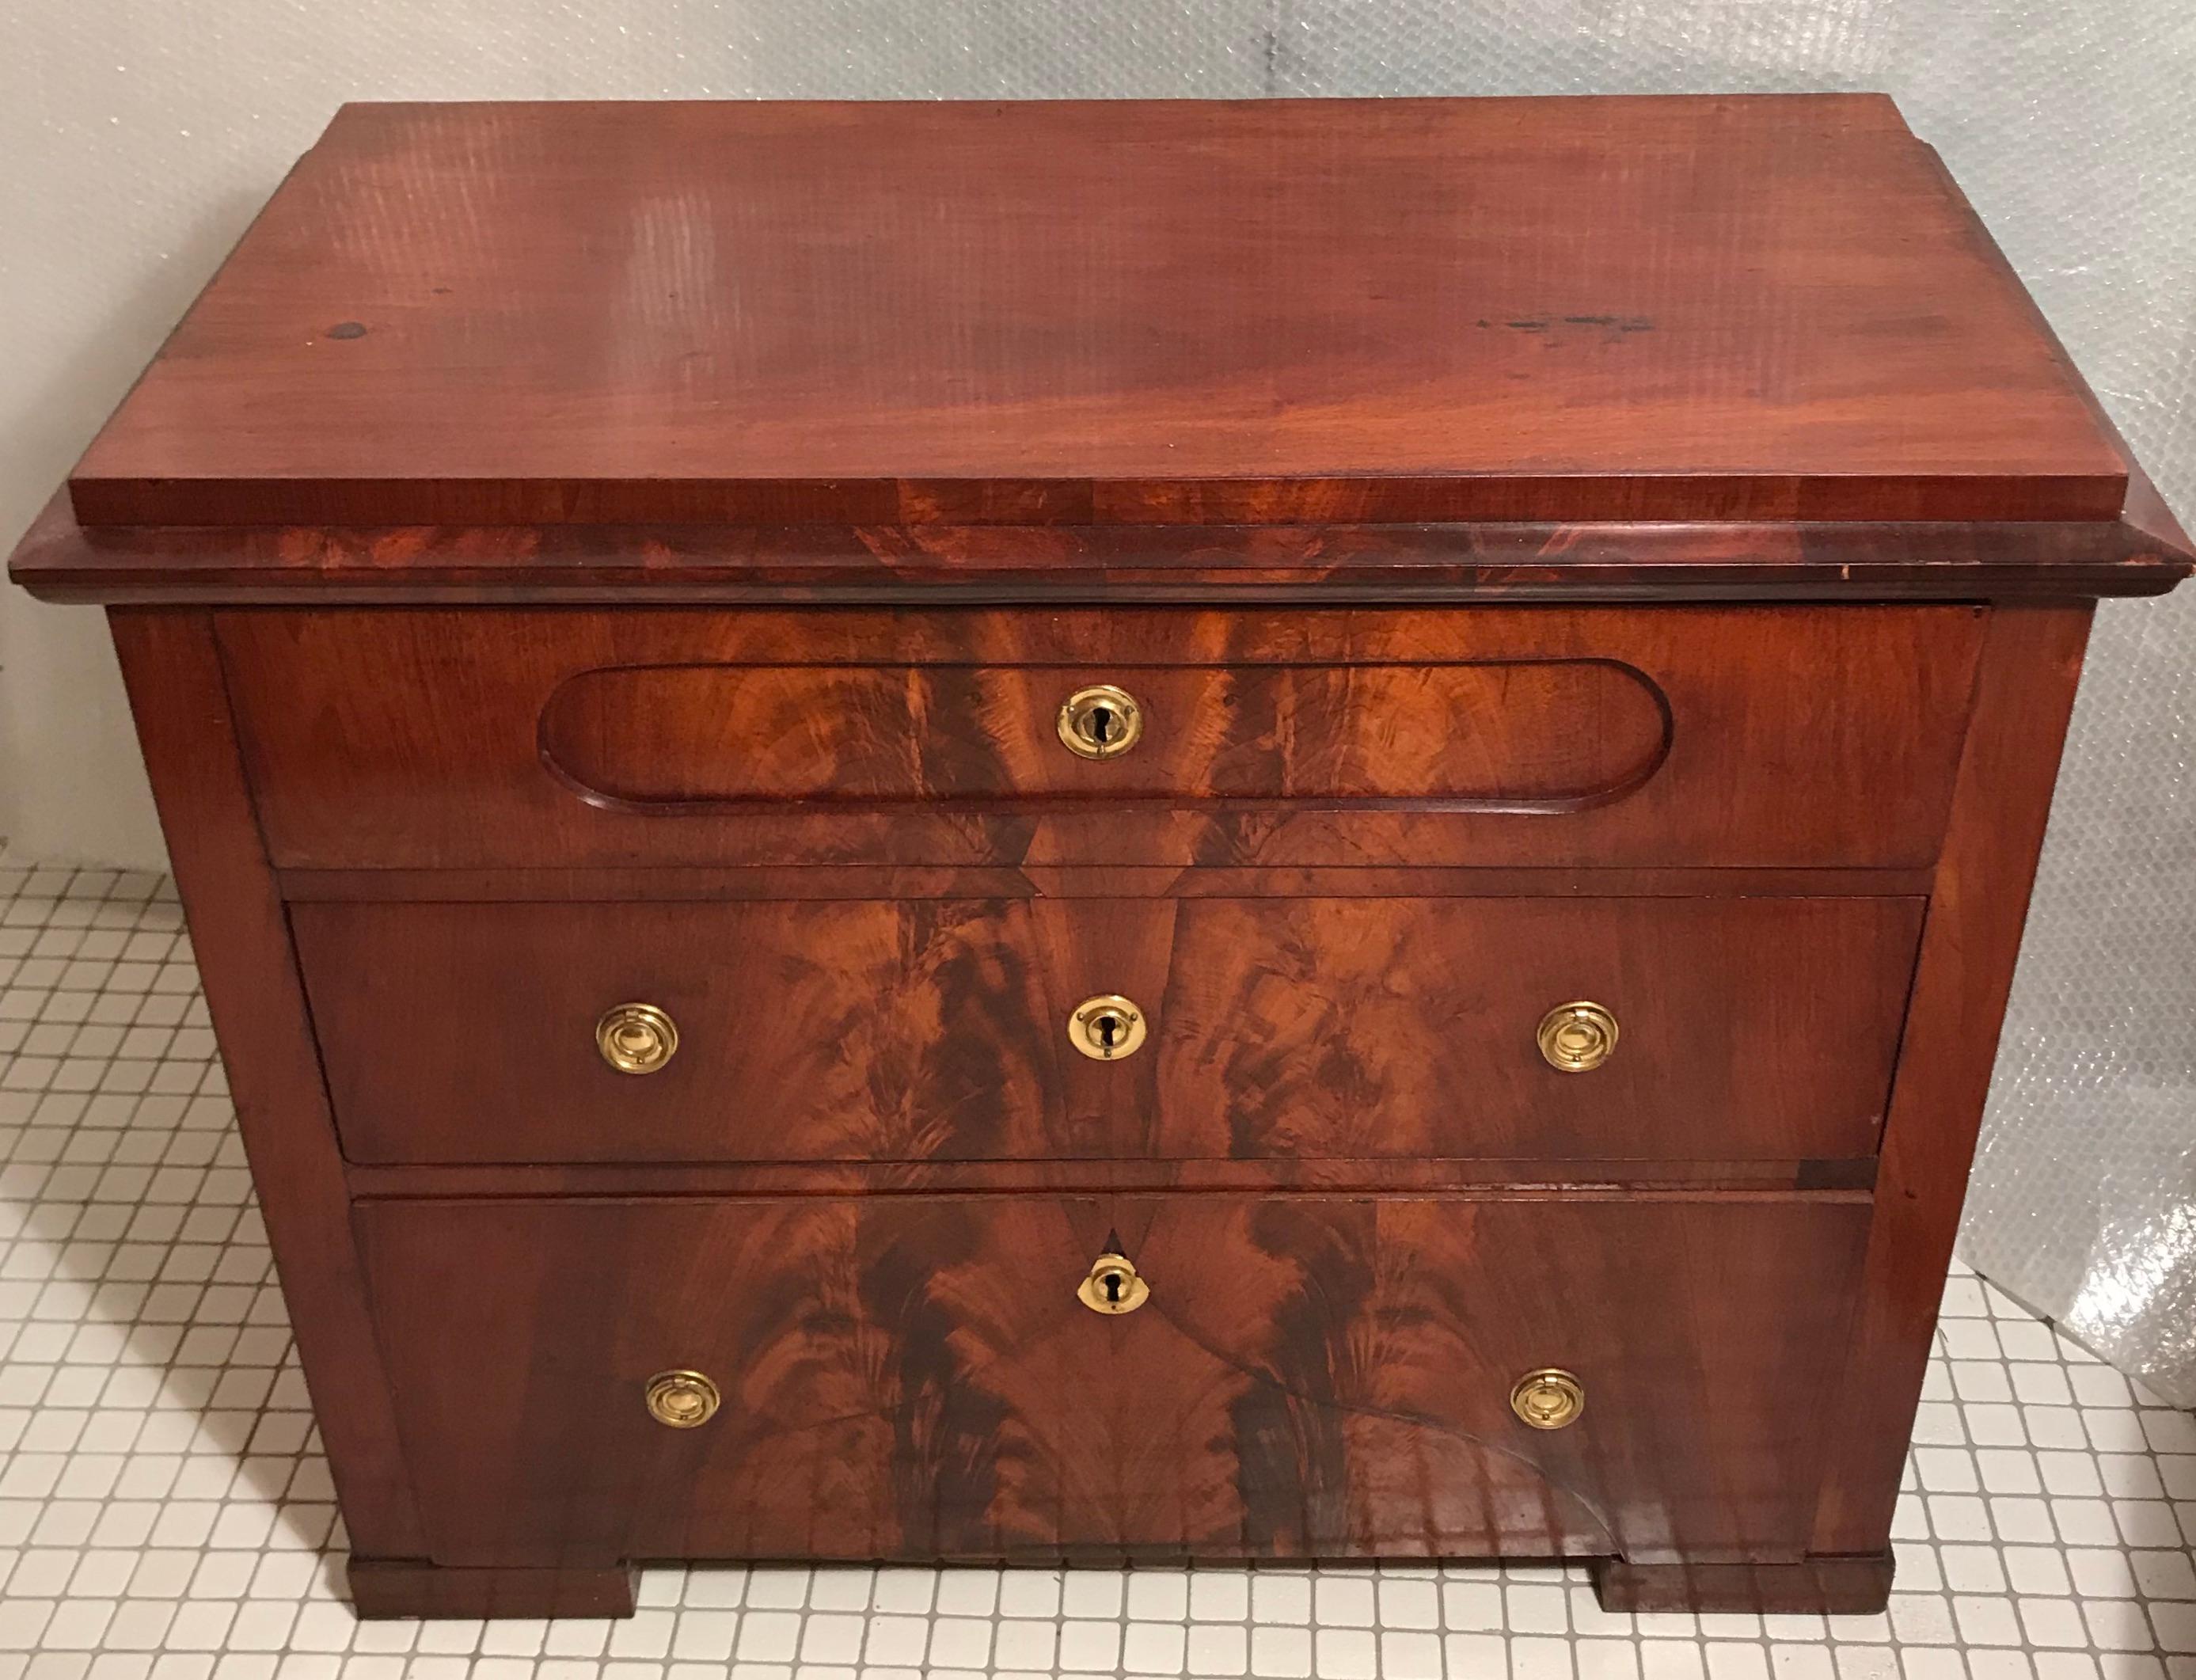 Biedermeier chest of drawers which stands out for its beautiful mirrored mahogany veneer was made in Denmark around 1820. It has three drawers and original brass fittings. It is in very good, refinished and French polished condition. The commode